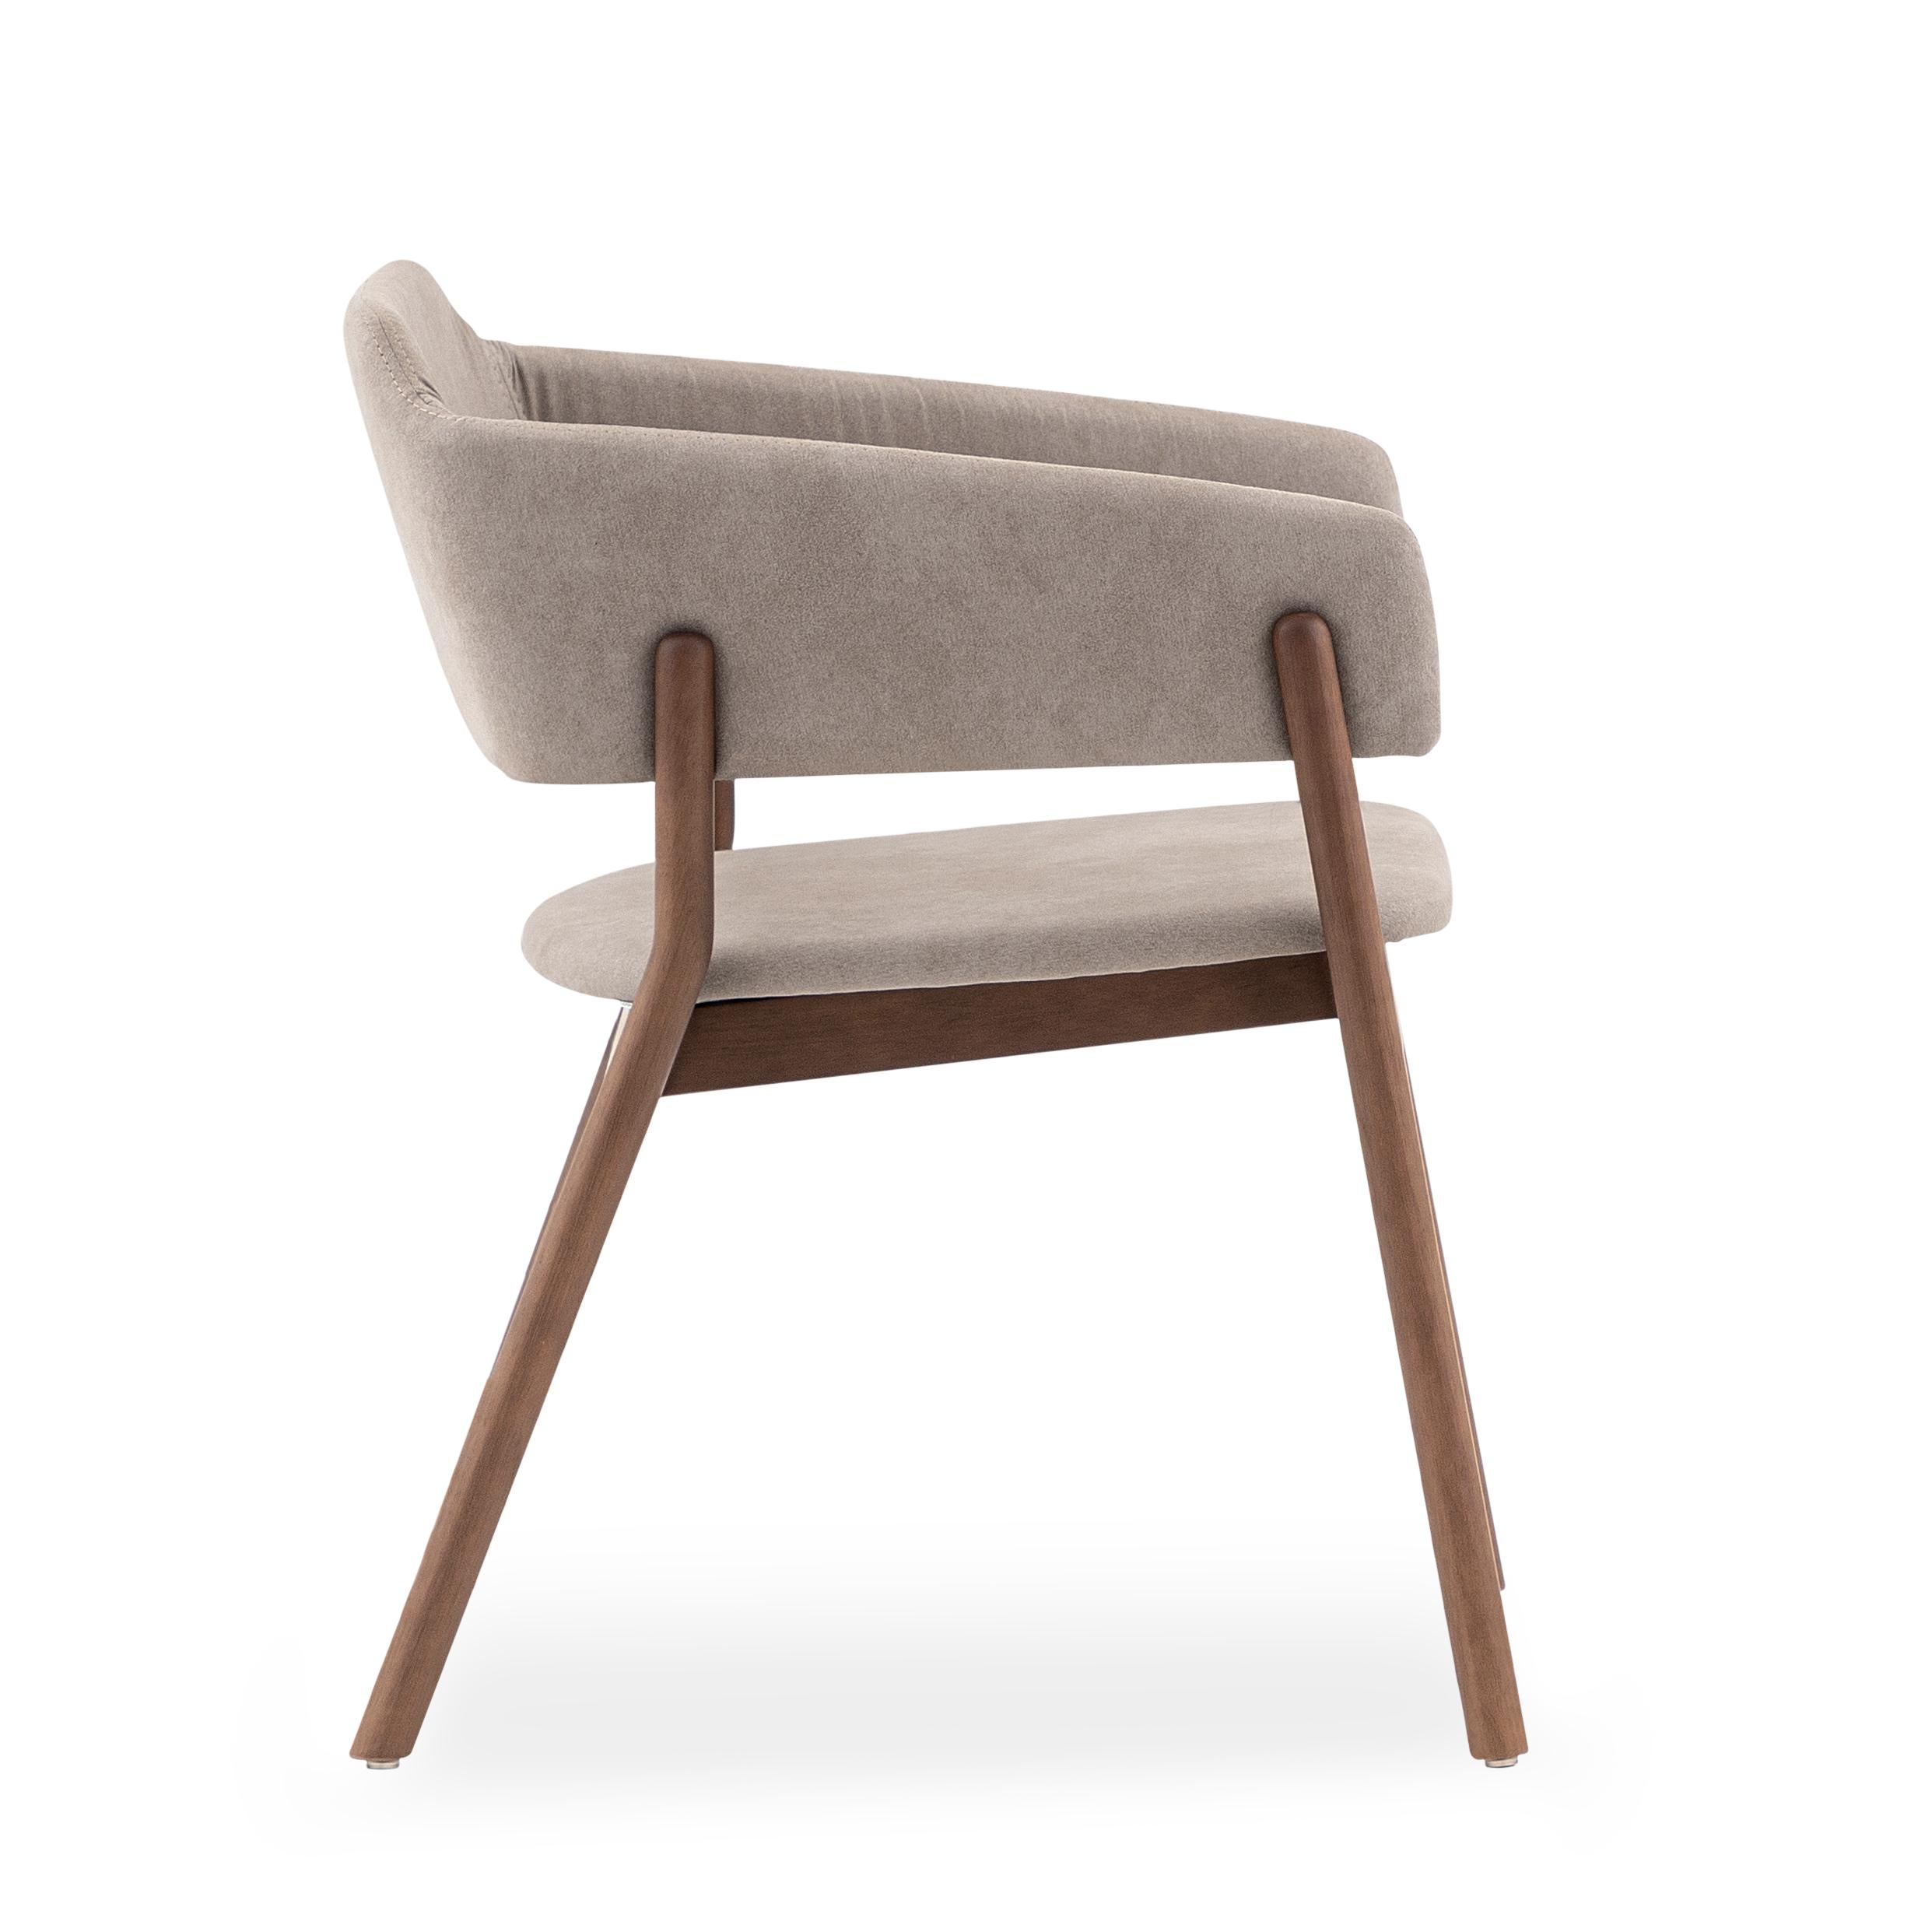 Our Uultis team has created this beautiful Stuzi dining chair to decorate your beautiful dining room table with a light brown fabric and walnut wood finish. This chair has a beautifully simple but elegant design that is going to perfectly go to